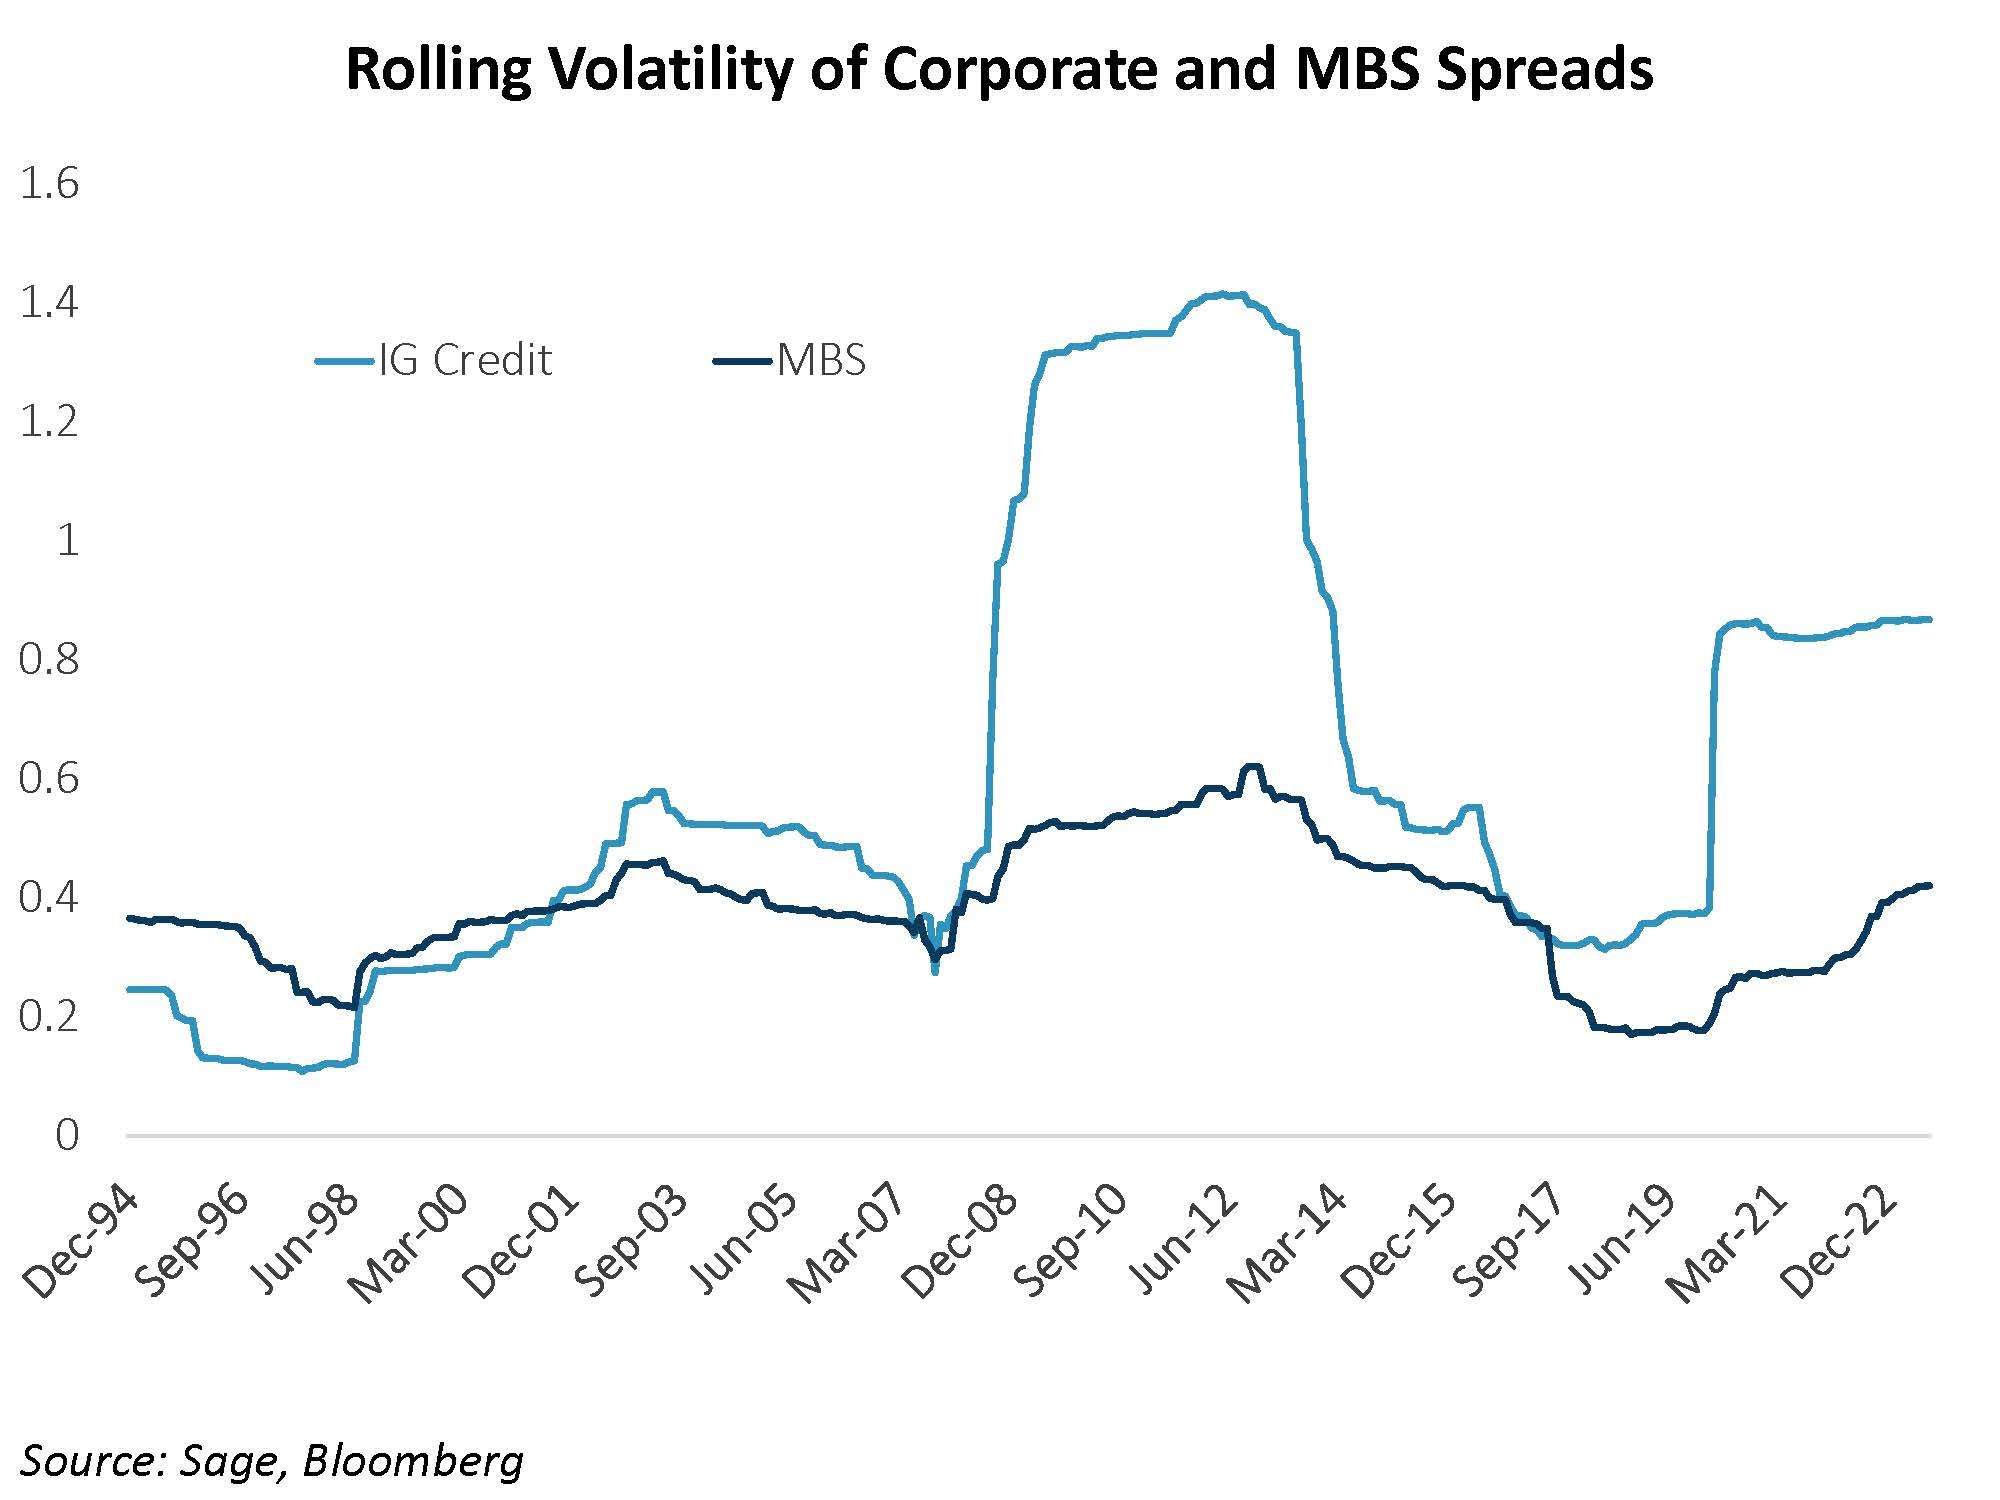 Rolling Volatility of Corporate and MBS Spreads